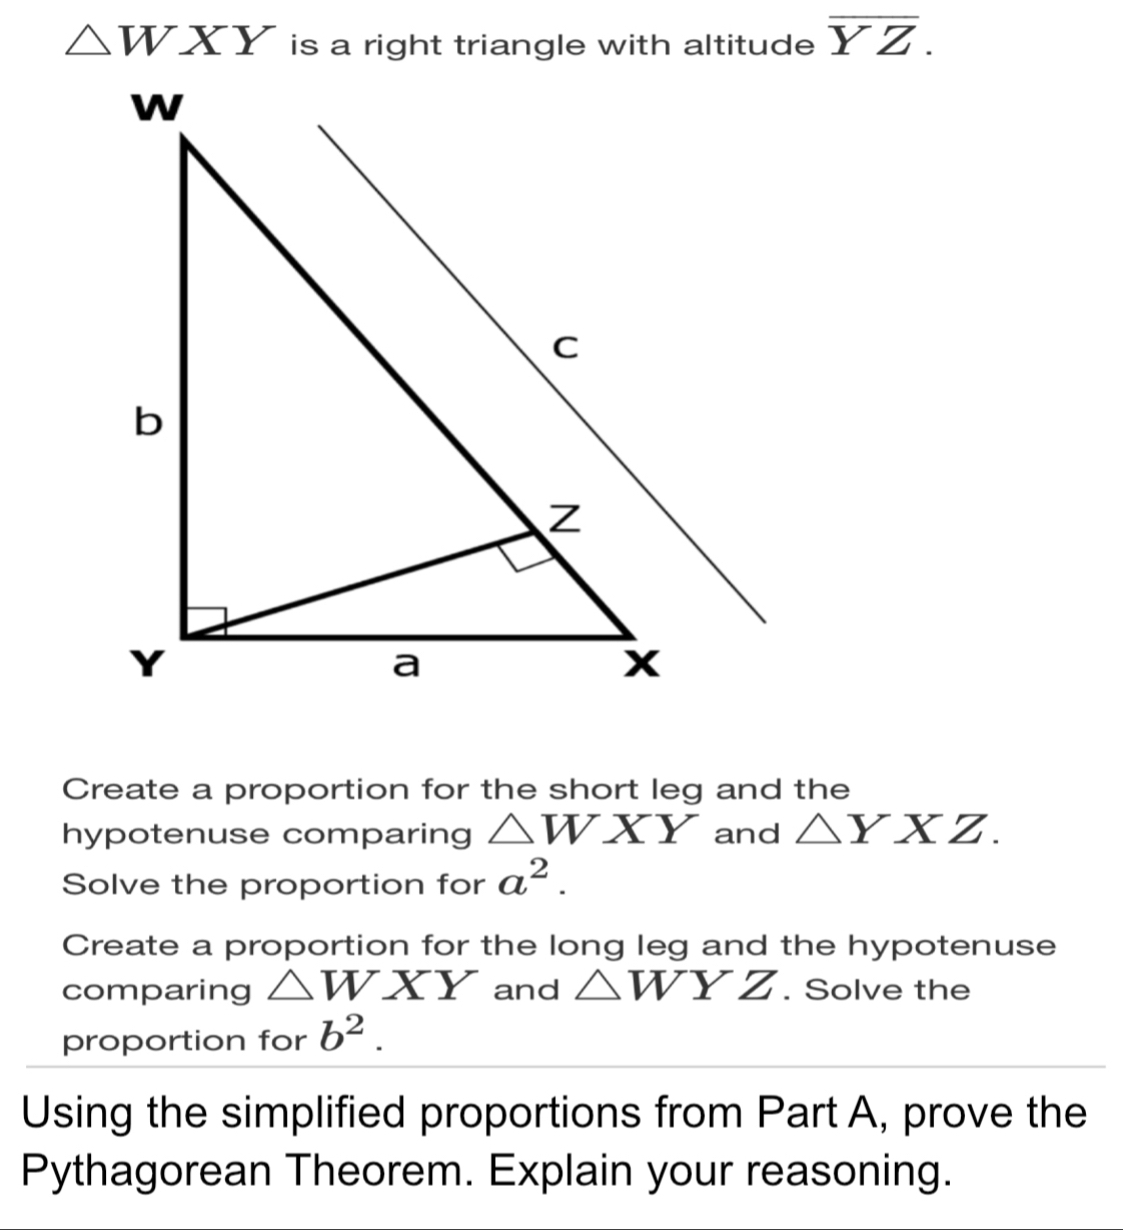 △ WXY is a right triangle with altitude overline YZ. Create a proportion for the short leg and the hypotenuse comparing △ WXY and △ YXZ. Solve the proportion for a2. Create a proportion for the long leg and the hypotenuse comparing △ WXY and △ WYZ . Solve the proportion for b2. Using the simplified proportions from Part A, prove the Pythagorean Theorem. Explain your reasoning.